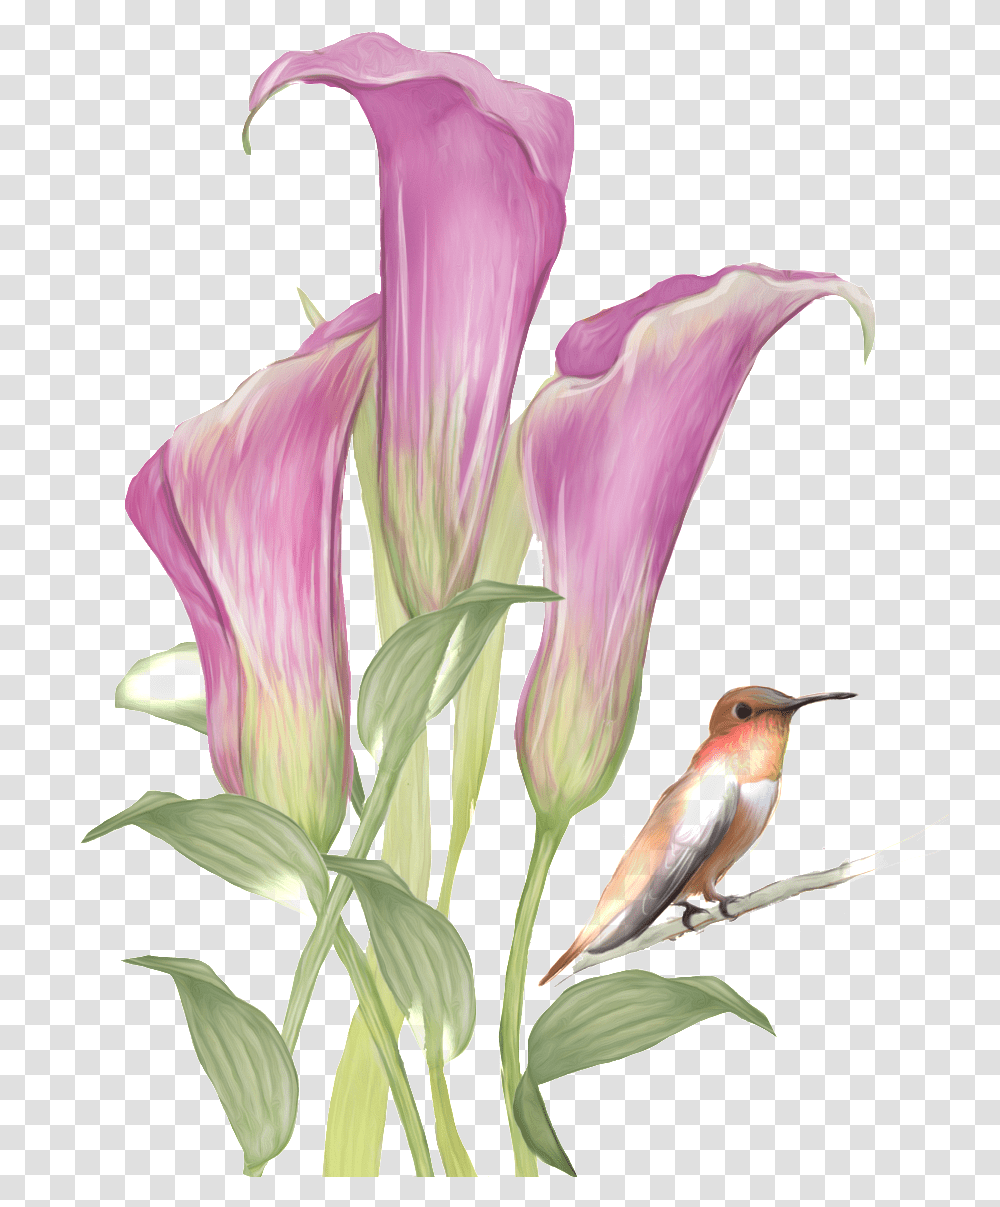 This Graphics Is Hand Drawn Flowers And Birds Pattern Drawn Flowers With Birds, Animal, Plant, Blossom, Petal Transparent Png